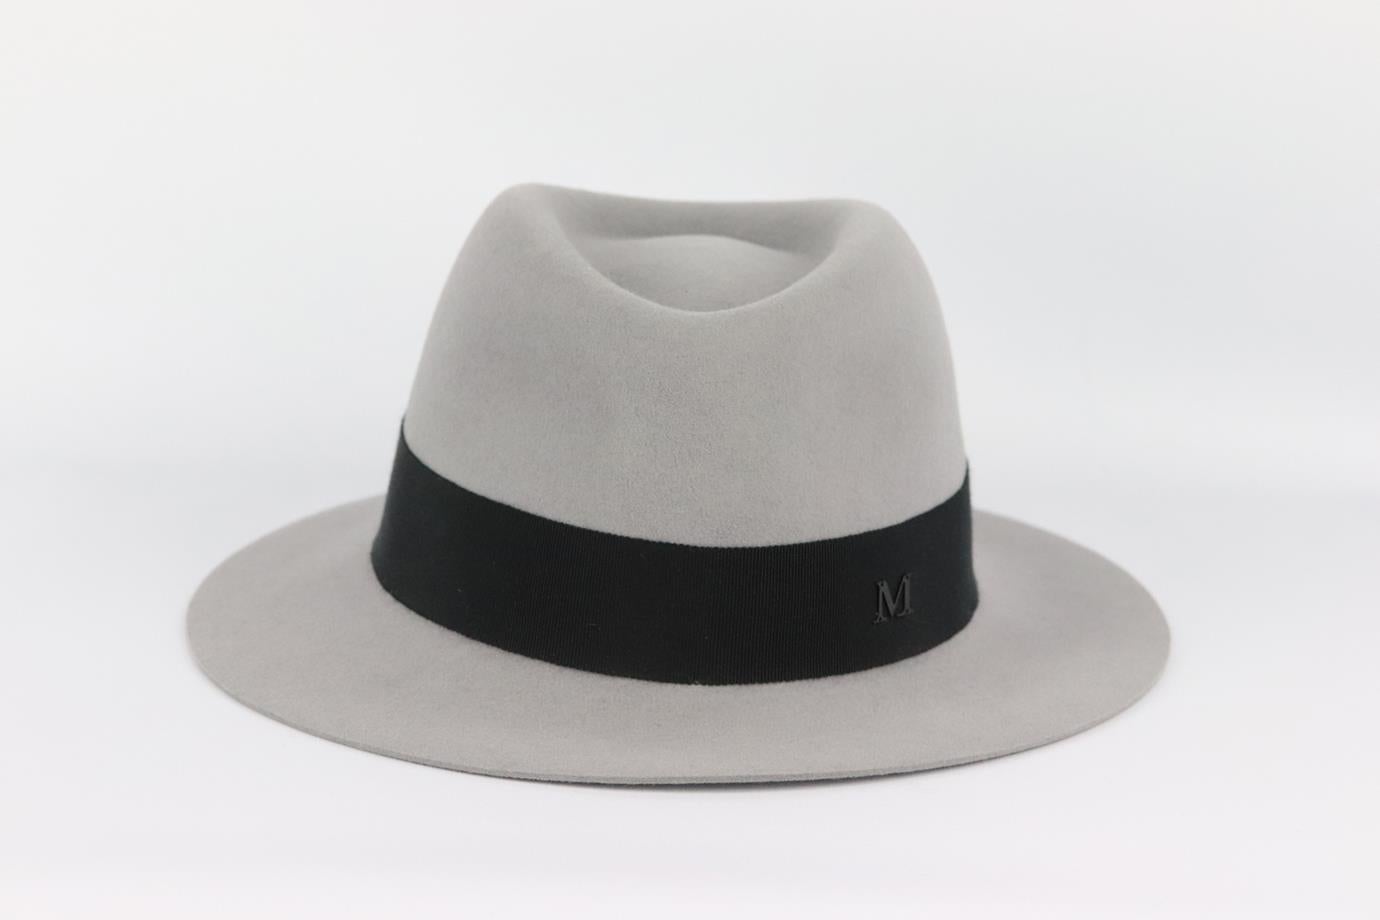 Maison Michel grosgrain trimmed wool felt fedora. Grey and black. Pull on. 100% Wool; trim: 56% cotton, 44% viscose. Does not come with dustbag or box. Size: Large. Circumference: 24.4 in. Brim Width: 2.5 in. Very good condition - No sign of wear;